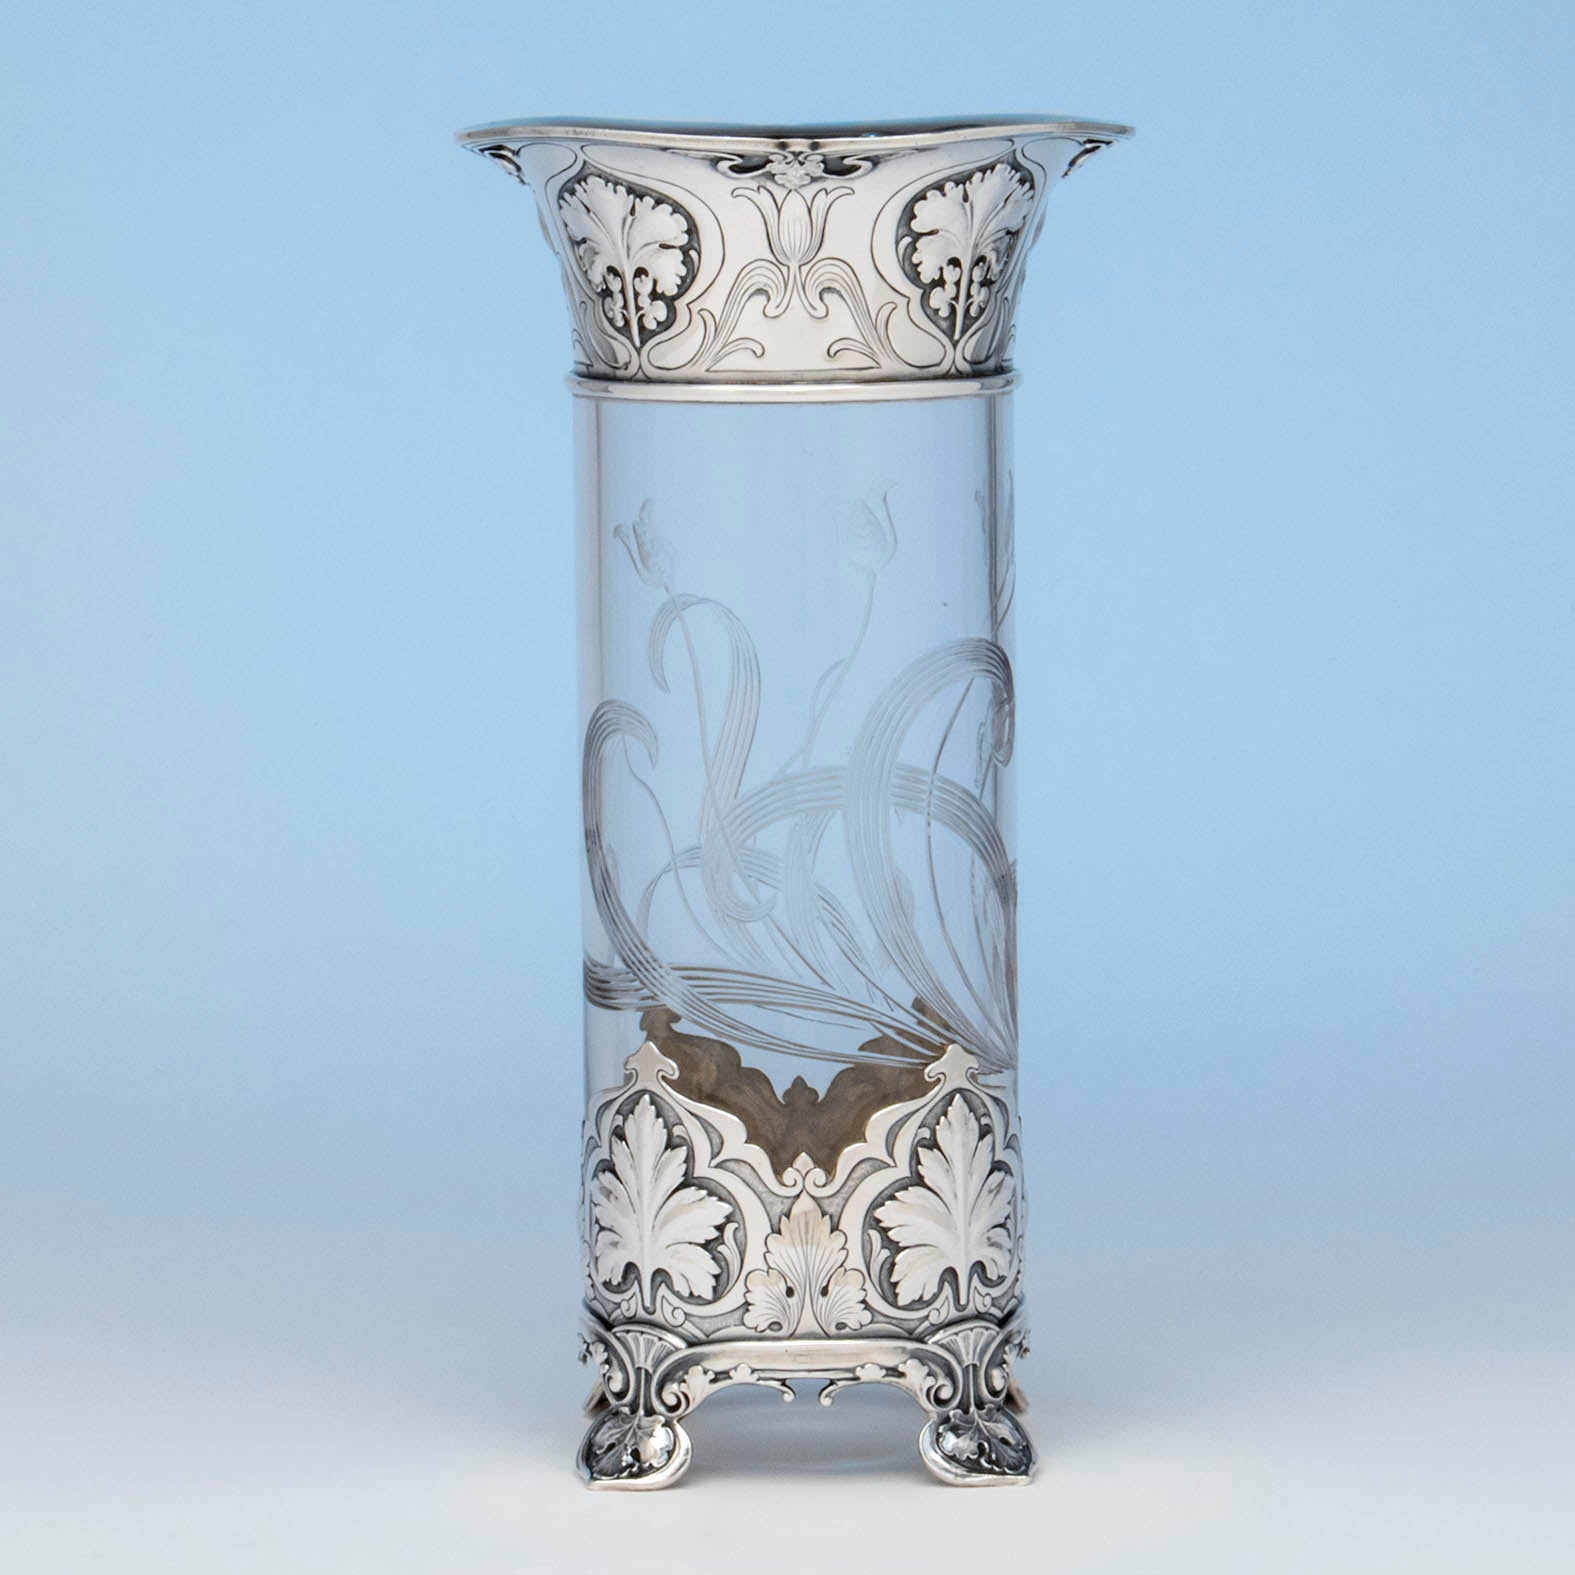 Gorham 'Athenic' Antique Sterling Silver and Cut Glass Vase, Providence, RI, 1902